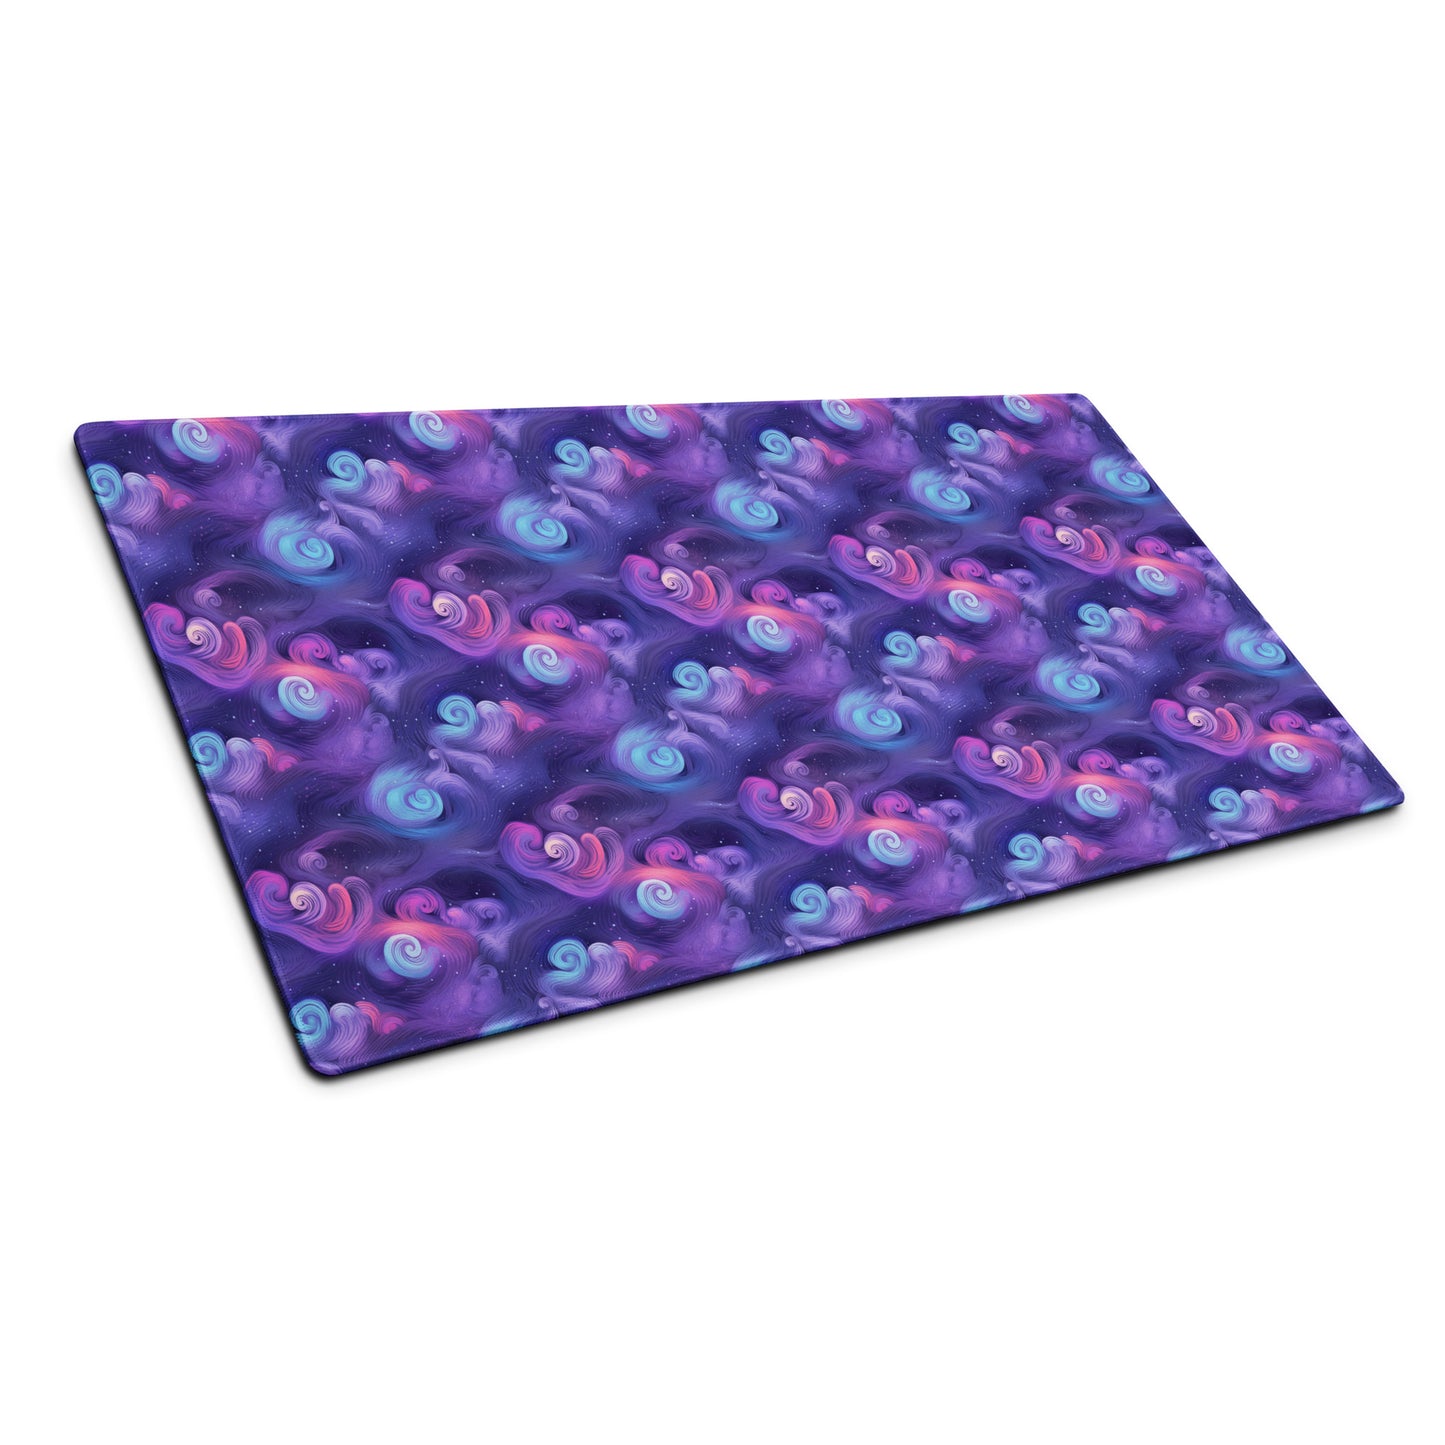 A 36" x 18" desk pad with fluffy clouds and stars on it shown at an angle. Blue and Purple in color